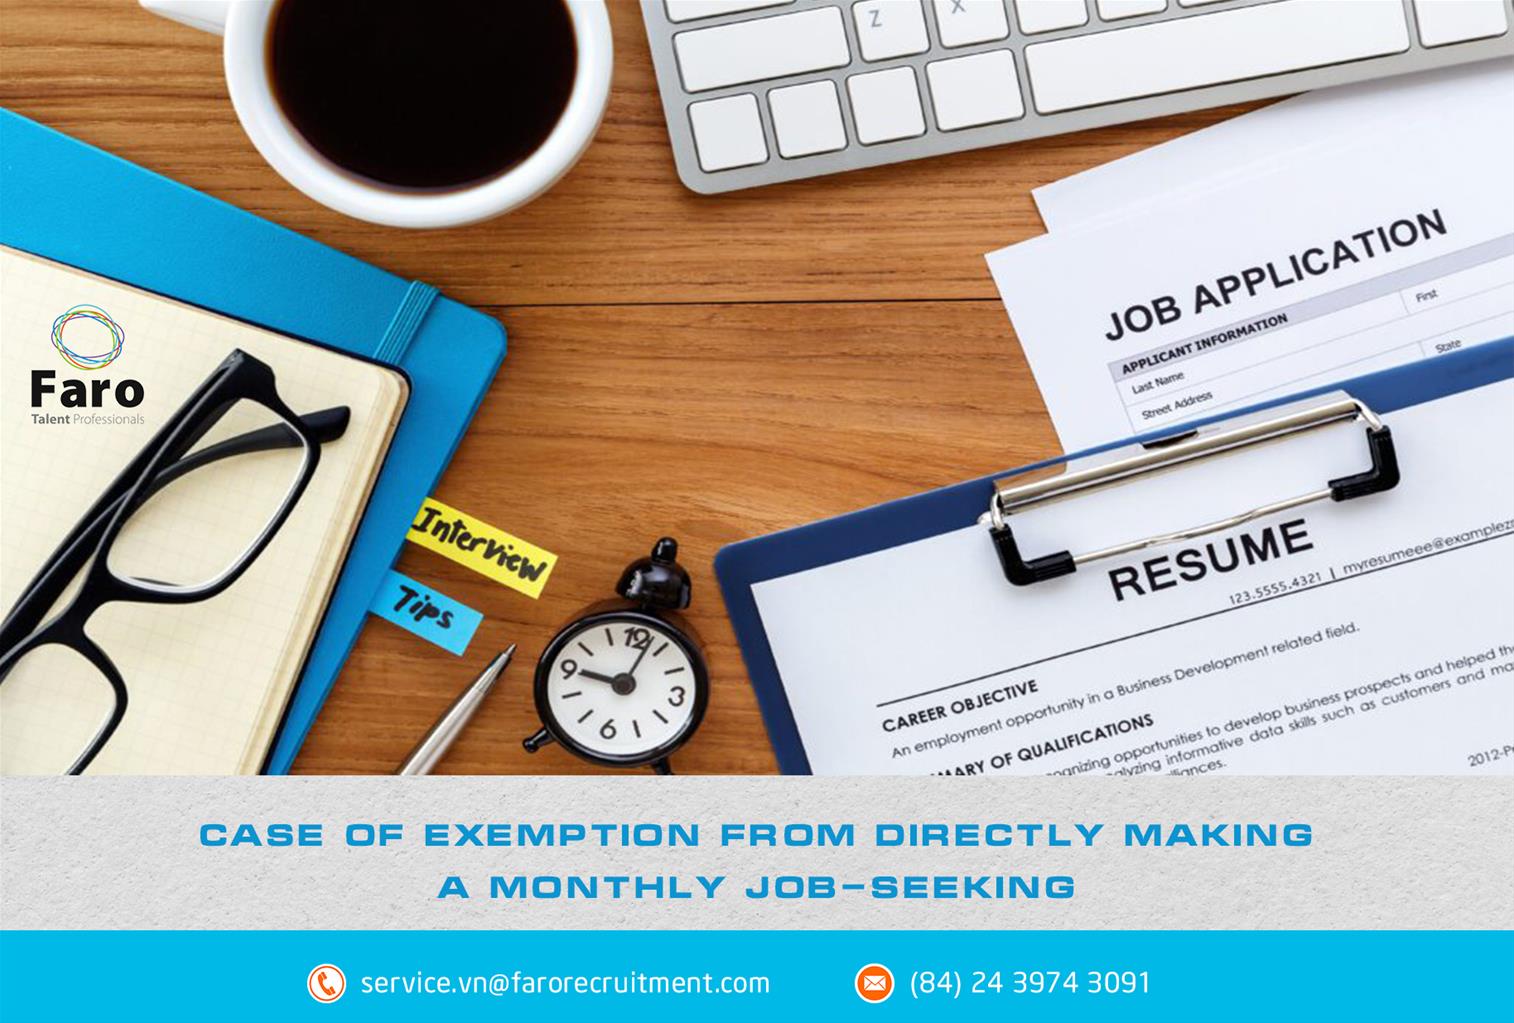 Case of exemption from directly making a monthly job-seeking notice under Circular 15/2023/TT-BLDTBXH issued on December 29, 2023